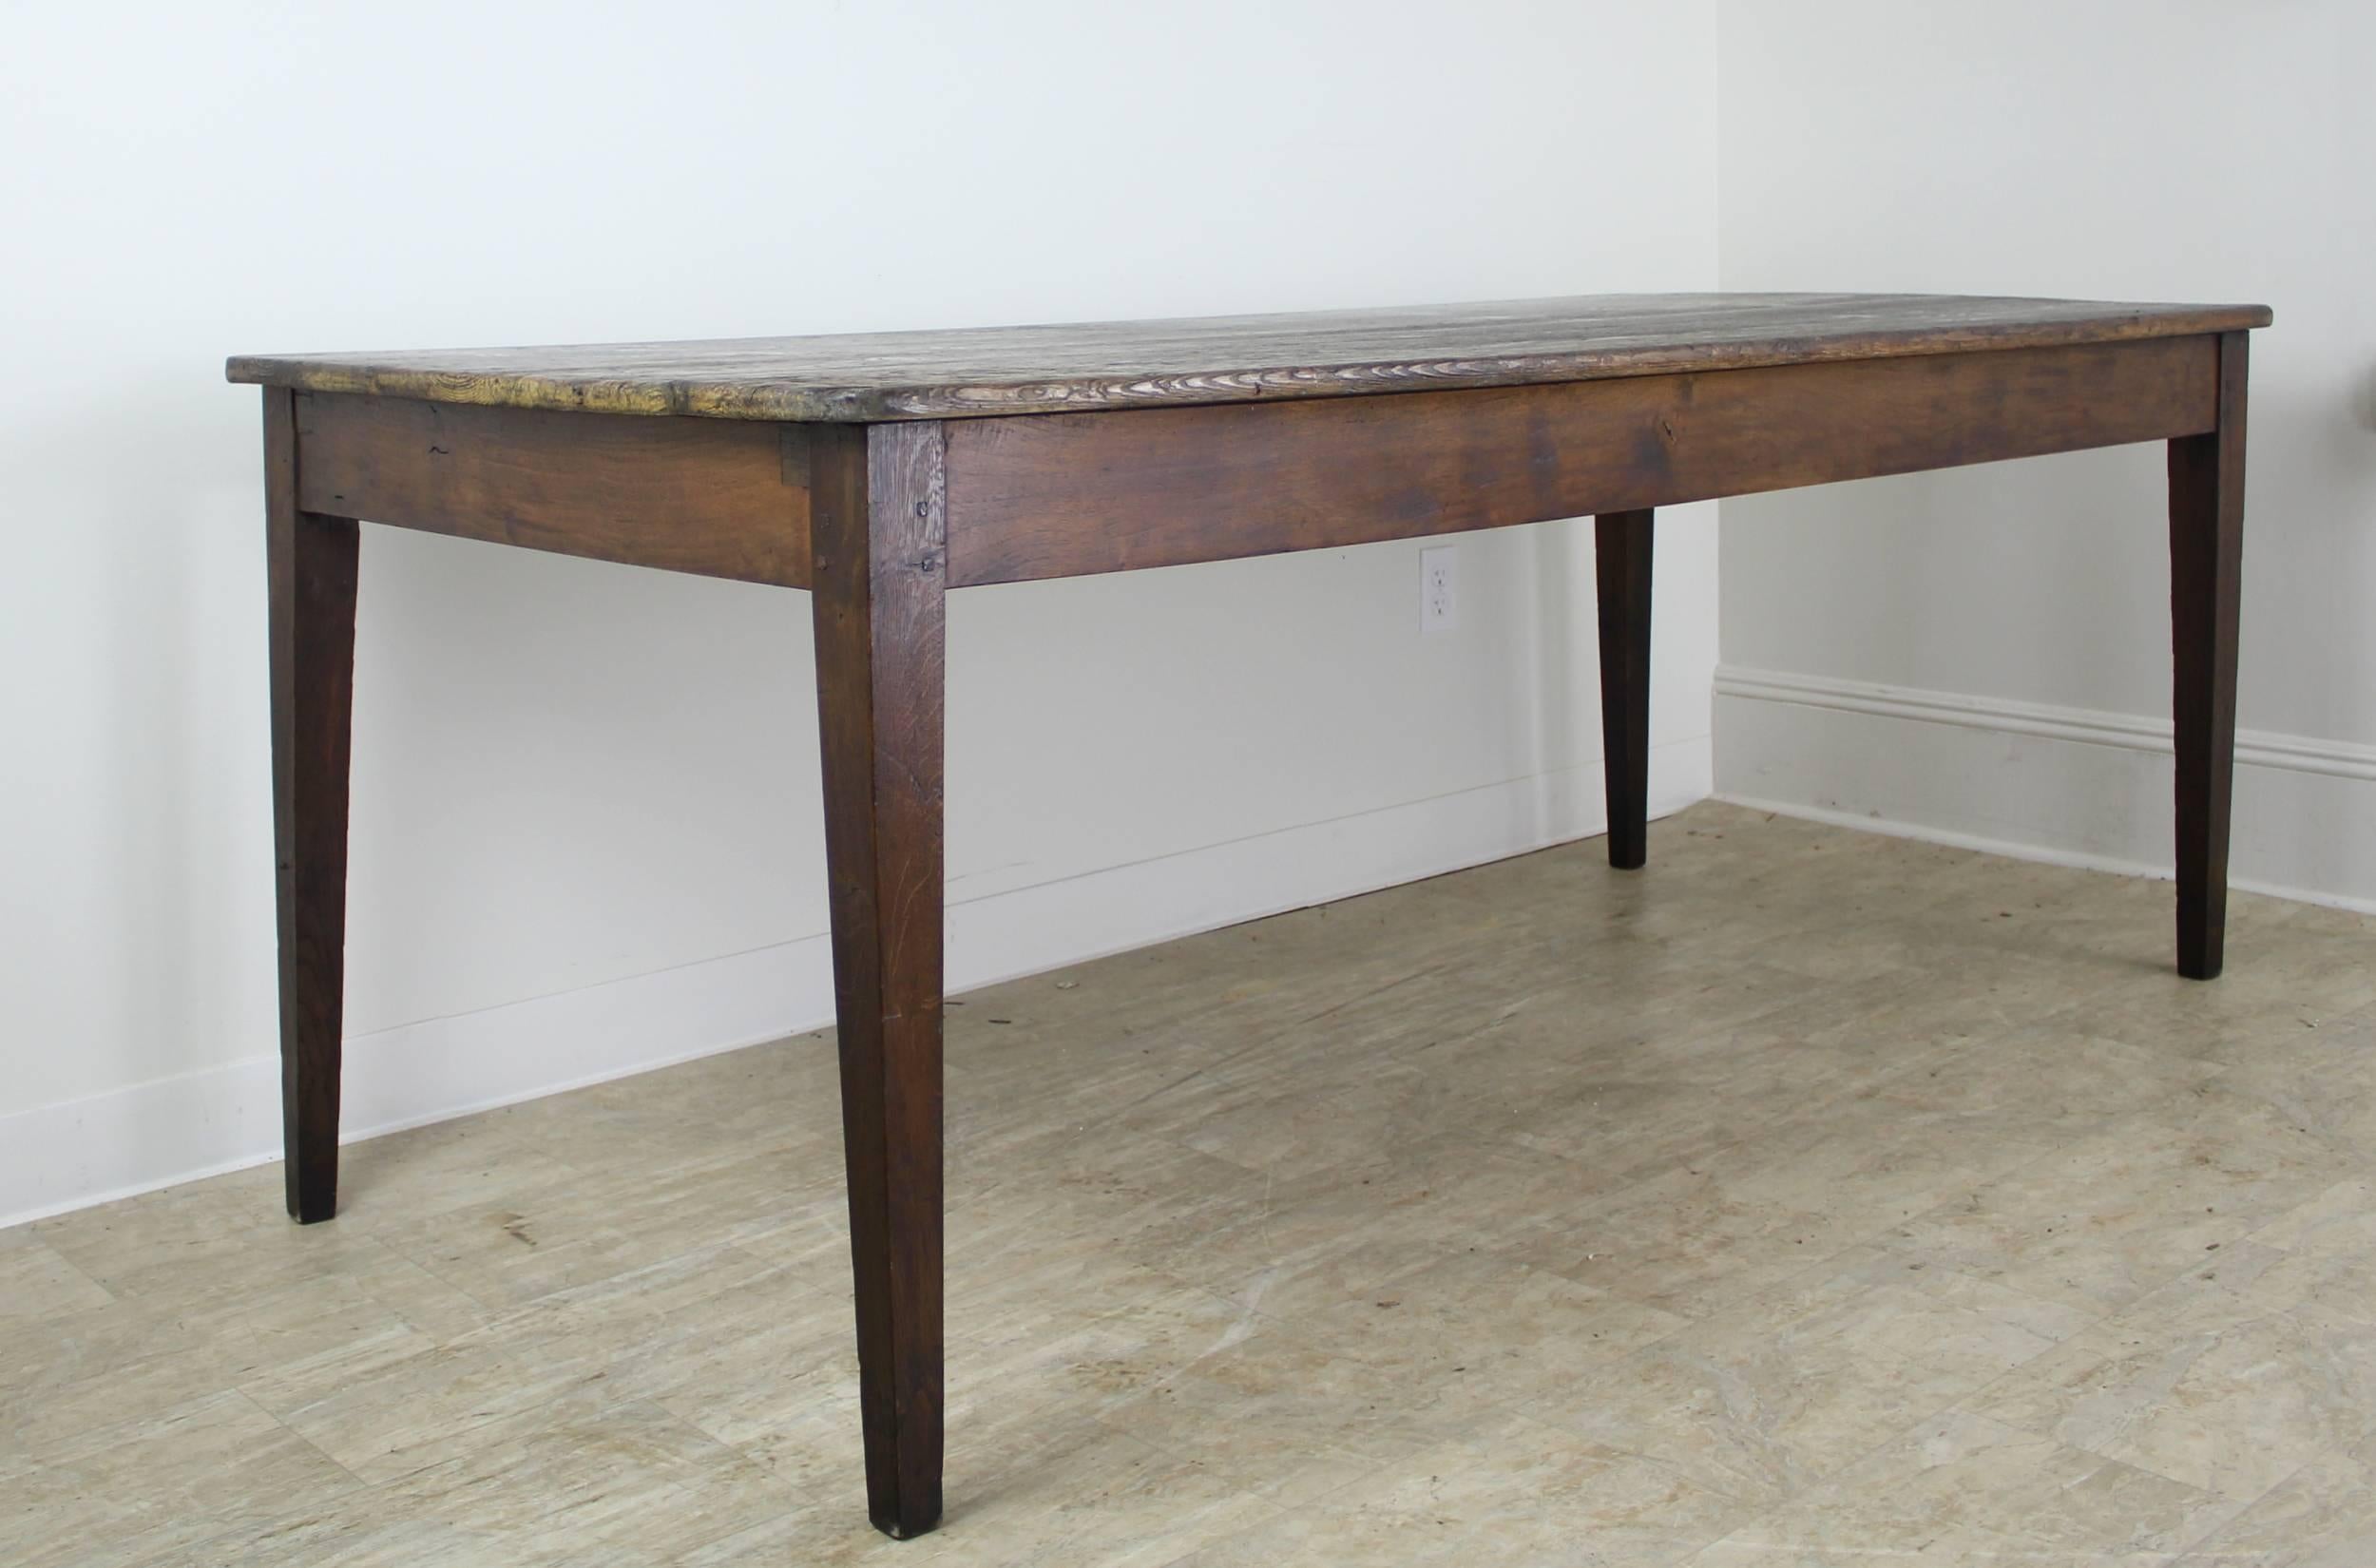 A sturdy handsome pine farm table with a scrubbed top, full of character. This table has great depth for accommodating eight place settings, and a turkey in the middle! Elegant tapered legs pegged at the top. A 24.5 inch apron height is good for